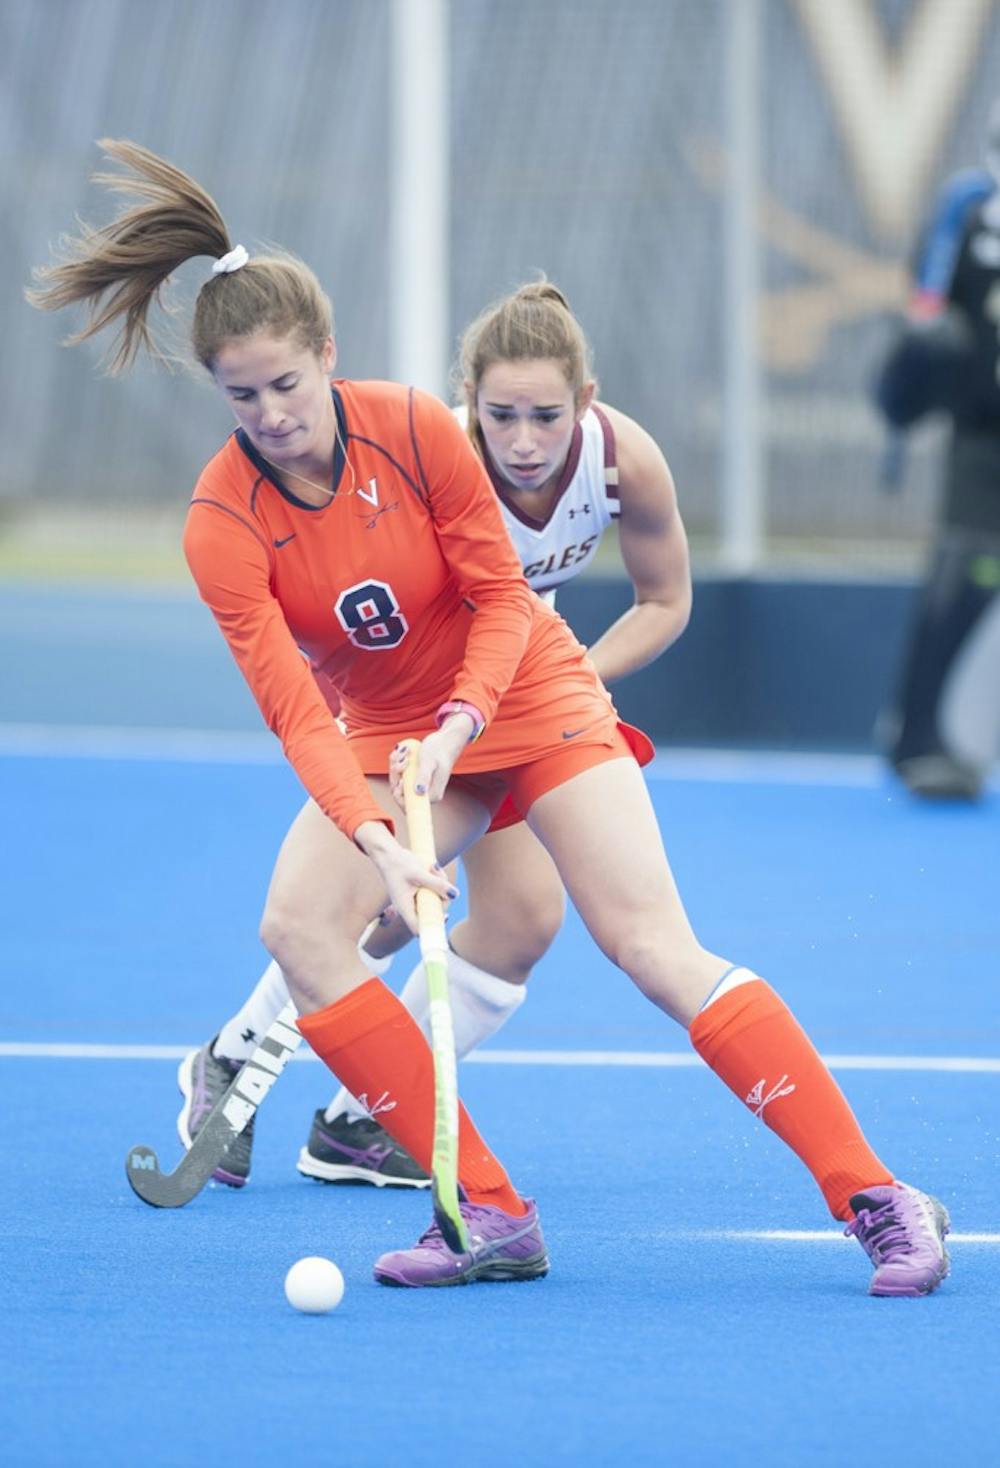 <p>Sophomore midfielder Tara Vittese paced Virginia with 35 points this season. The younger sister of former Cavalier field hockey players Michelle and Carissa Vittese ranked 14th nationally in points per game in her second collegiate campaign.&nbsp;</p>